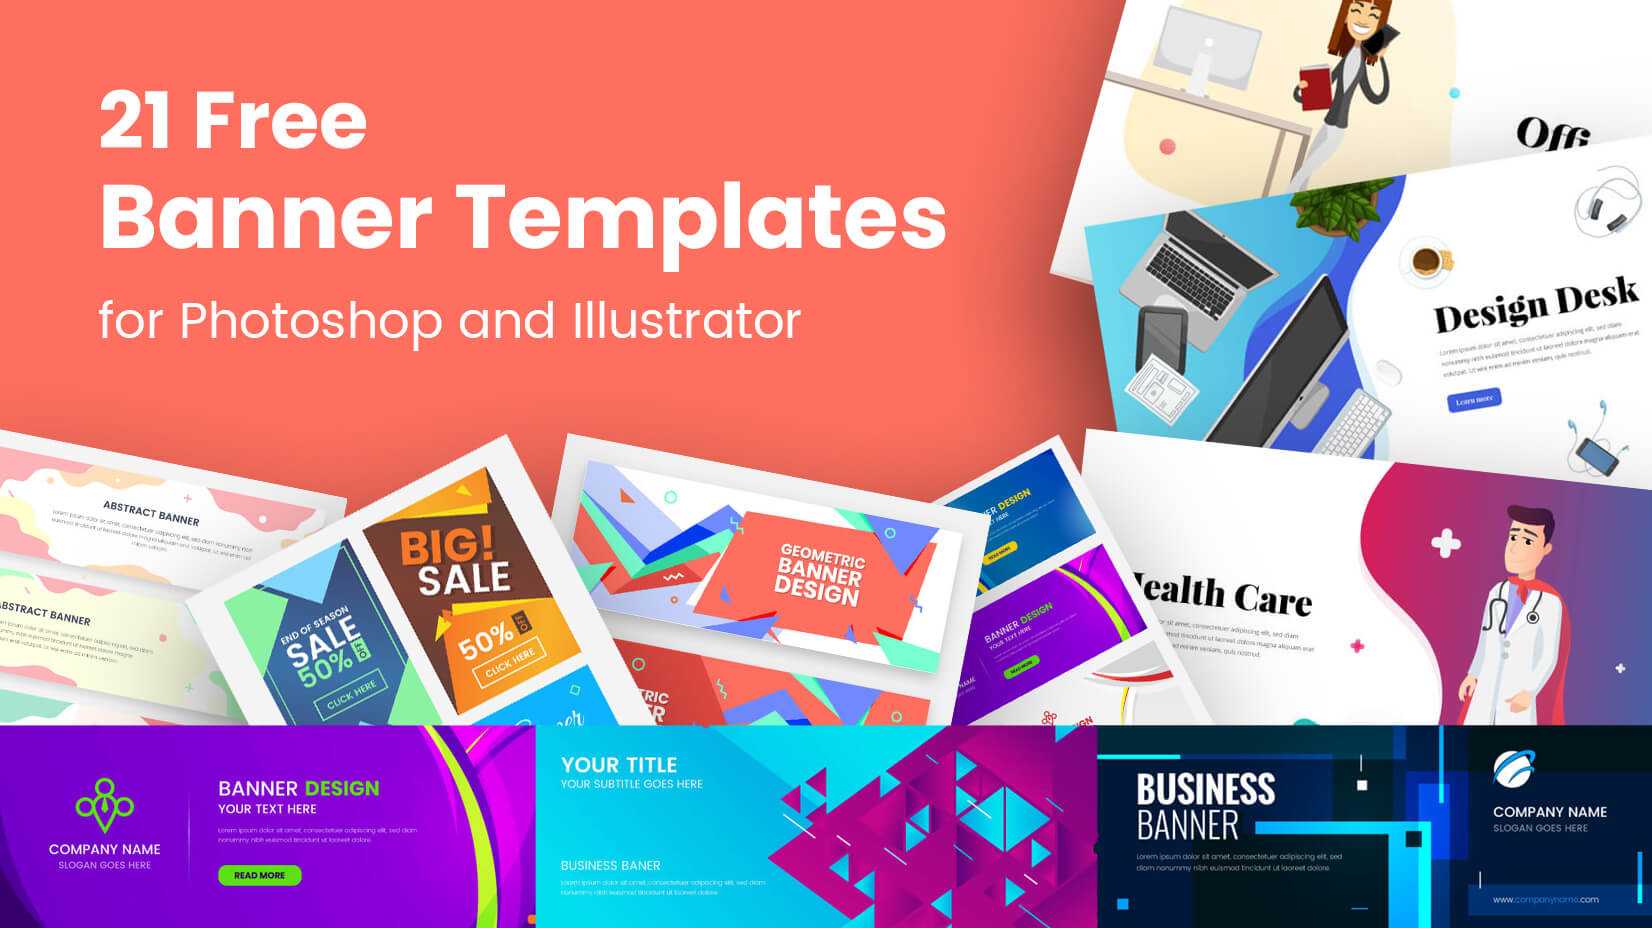 21 Free Banner Templates For Photoshop And Illustrator Within Free Online Banner Templates